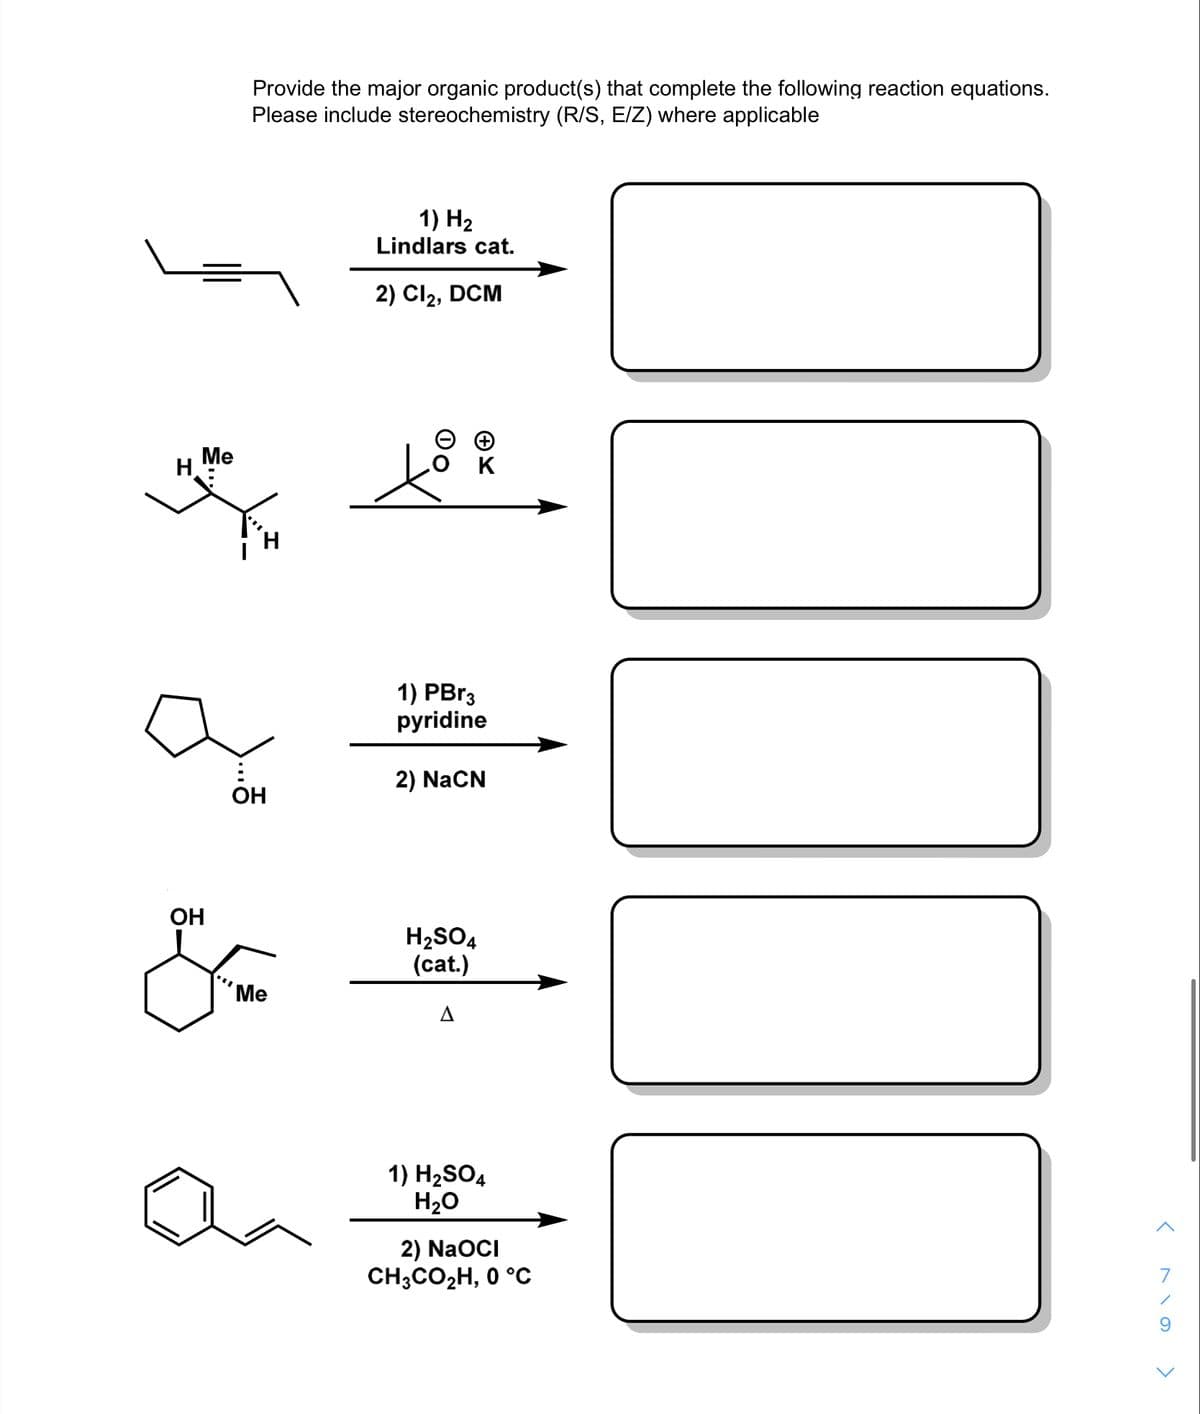 Provide the major organic product(s) that complete the following reaction equations.
Please include stereochemistry (R/S, E/Z) where applicable
1) H2
Lindlars cat.
2) Cl2,
DCM
Me
H.
K
1) PBr3
pyridine
2) NaCN
OH
OH
H2SO4
(cat.)
Ме
1) H2SO4
H20
2) NaOCI
CH;CO2H, 0 °C
7
